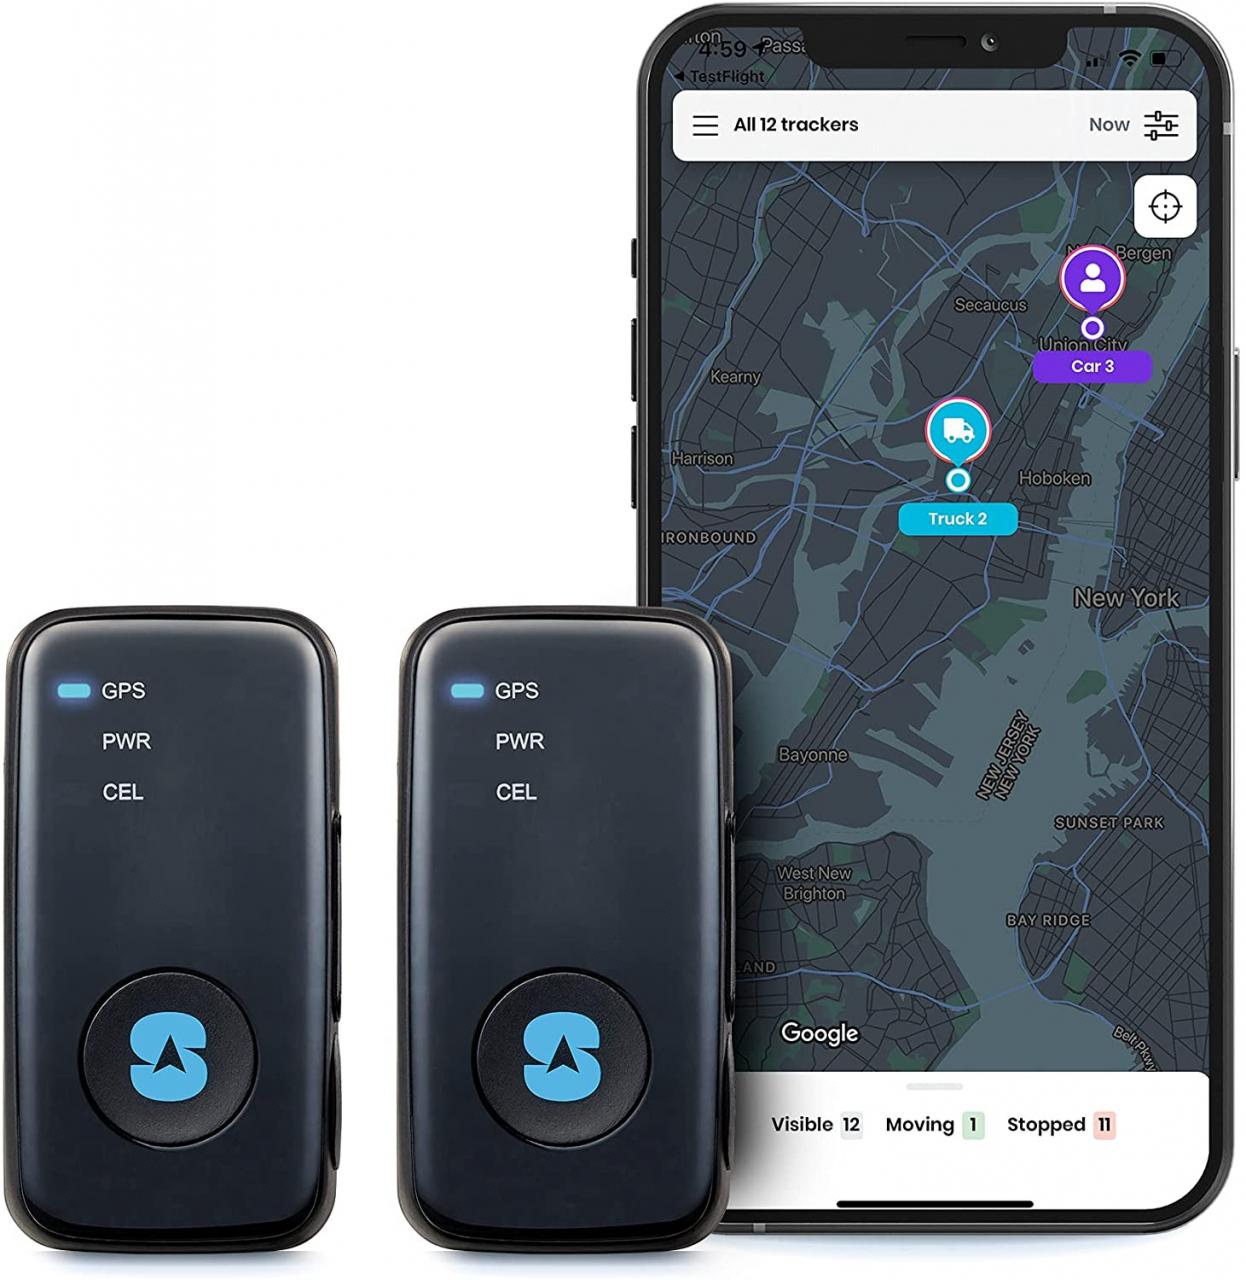 SpyTec STI_GL300 Review – A Great GPS Tracking Device for Personal Use -  SpyTec GL300 GPS Tracker